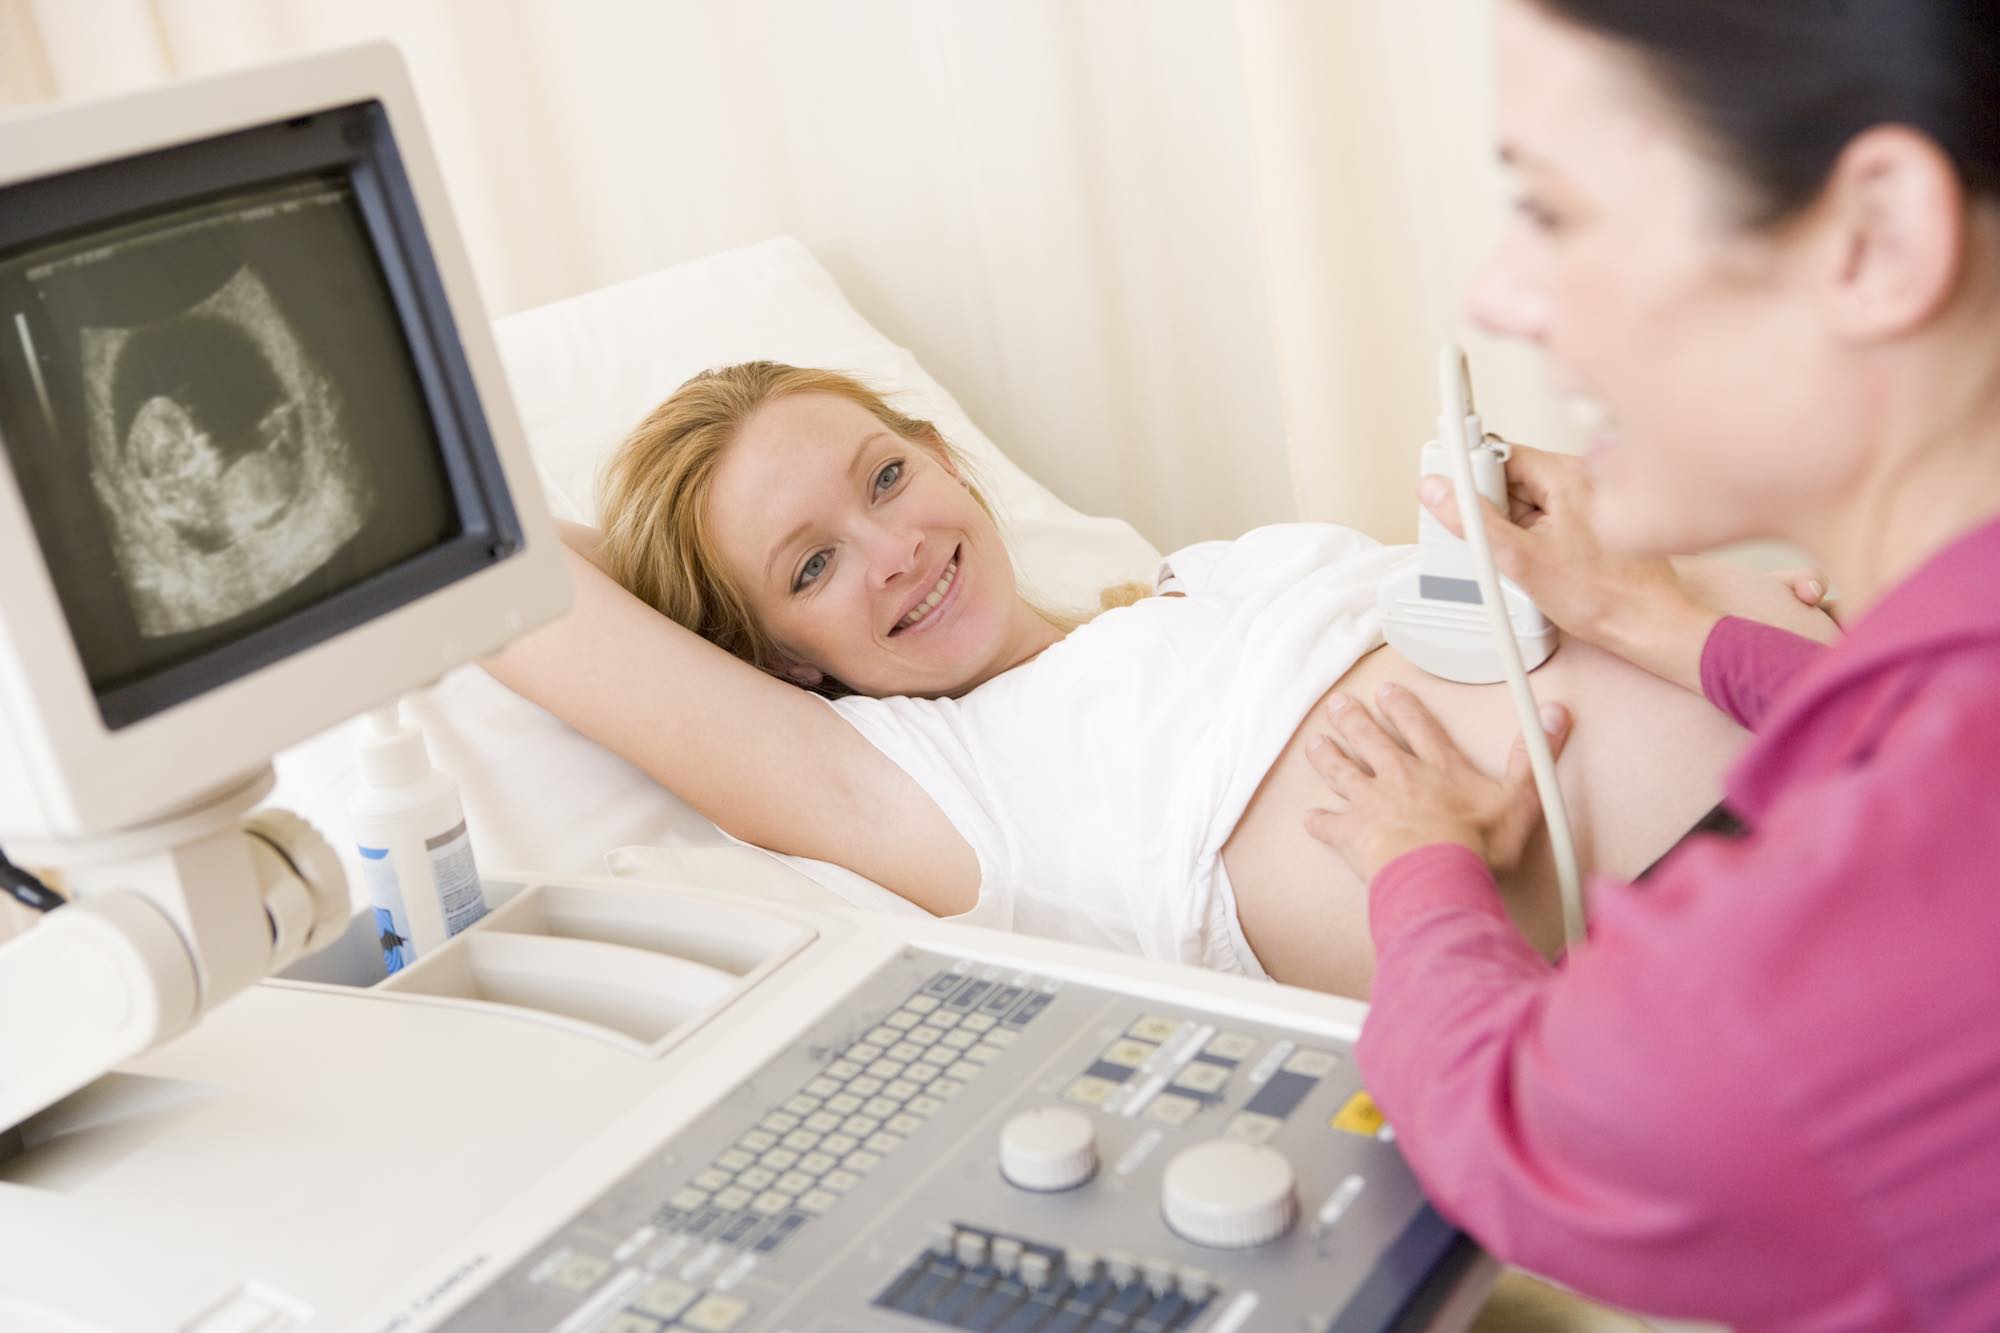 My Pregnant Health | Pregnancy Health Care Tips|Ultrasound